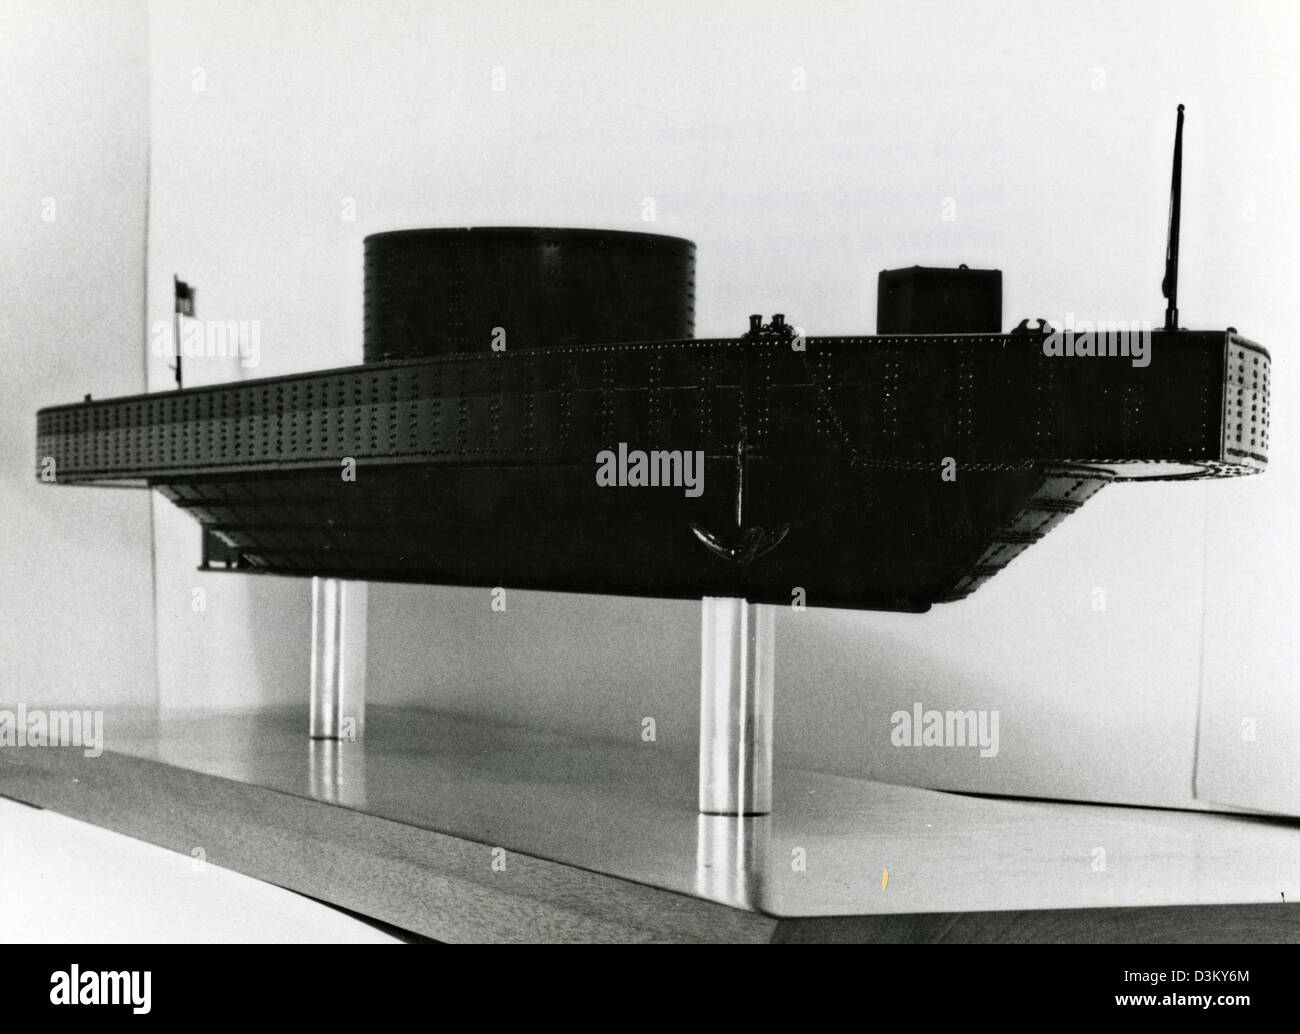 Undated photograph showing a scale model of the USS Monitor by Floyd Houston. The Brooklyn-built Monitor made nautical history after being designed and assembled in 118 days, and then commissioned, Feb. 25, 1862. Monitor fought in the first battle between two ironclads during an engagement against the Confederate navy ironclad CSS Virginia in the Battle of Hampton Roads on March 9, 1862. the battle marked the first time iron-armored ships clashed in naval warfare and signaled the end of the era of wooden ships. Stock Photo